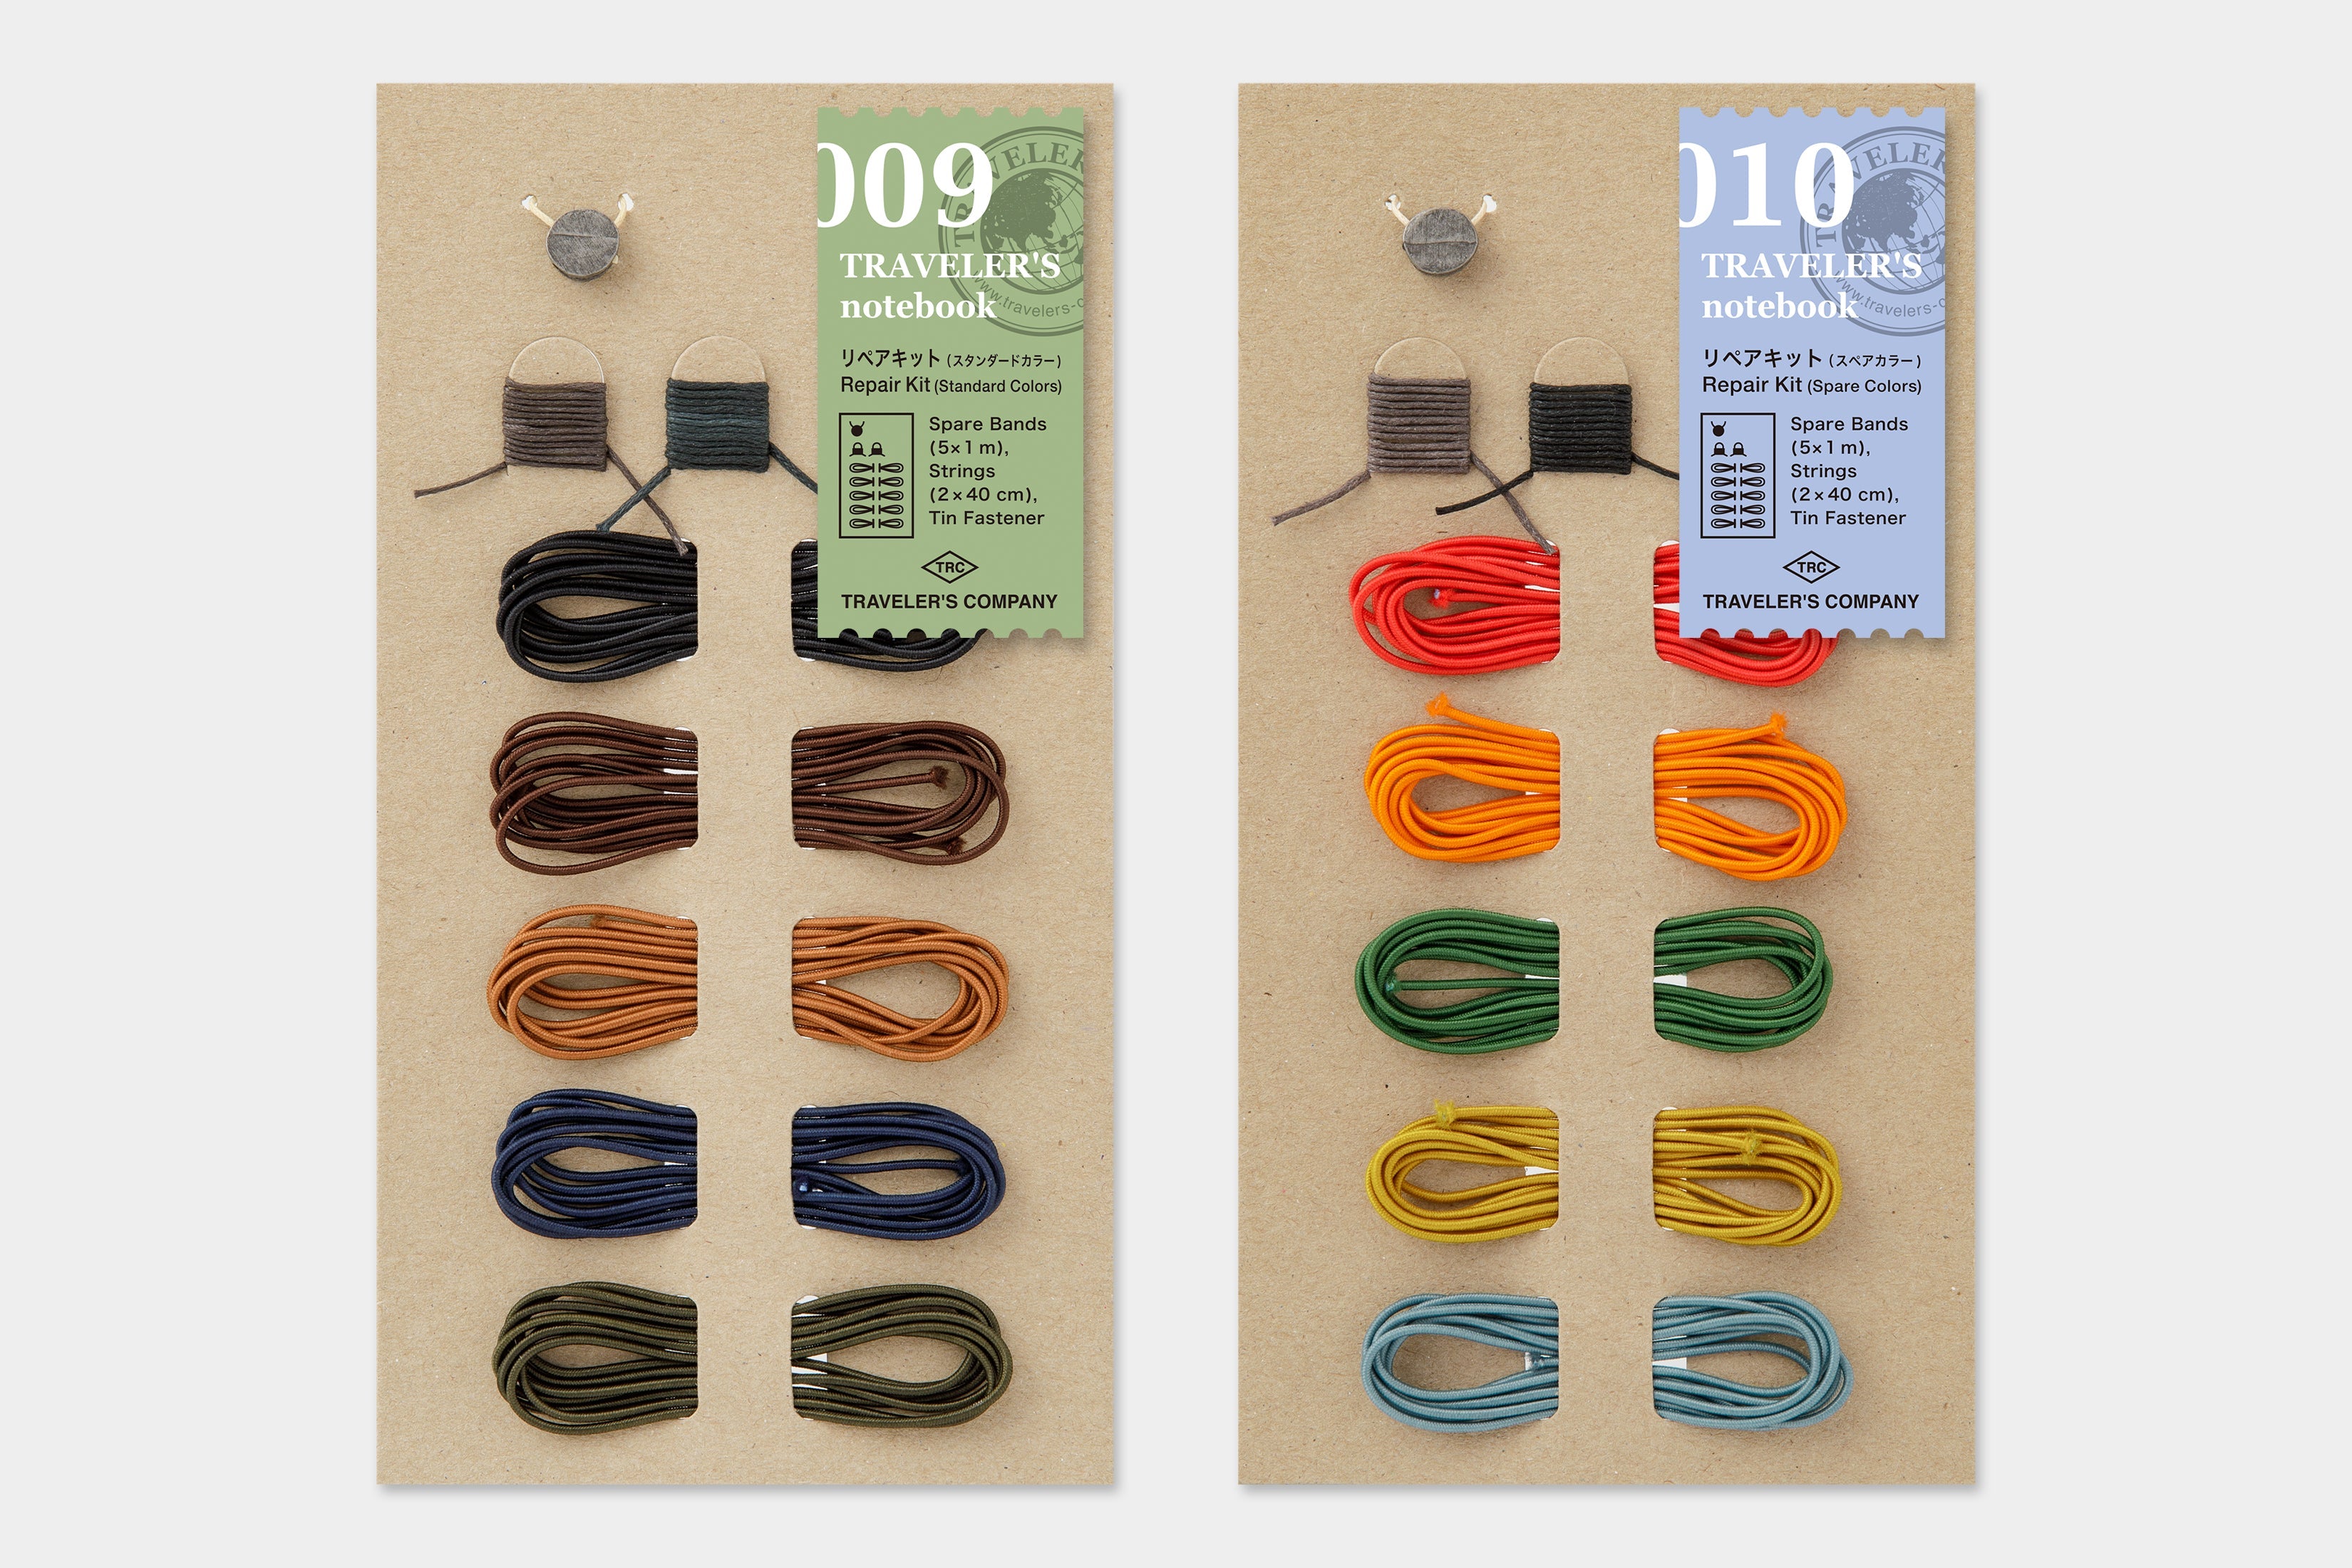 Spare Color Repair kit is also available, with brighter colors including red, orange, green, yellow, and turquoise. 